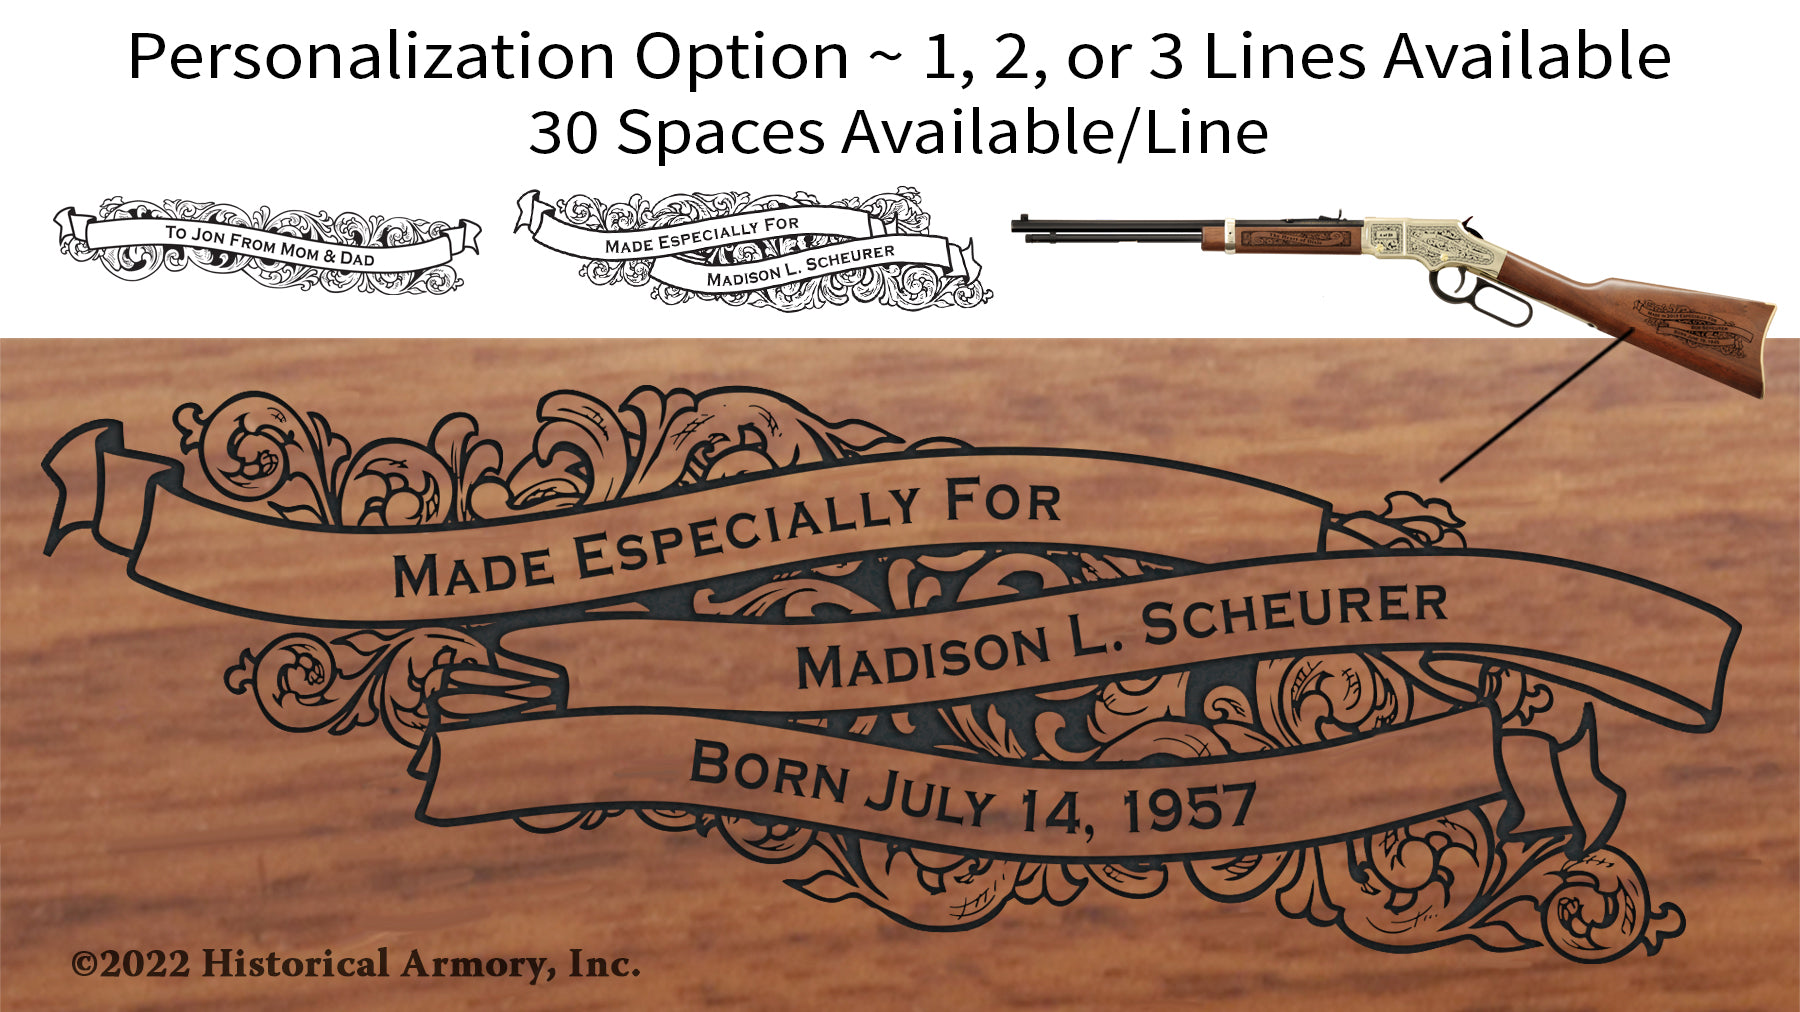 Ross County Ohio Engraved Rifle Personalization